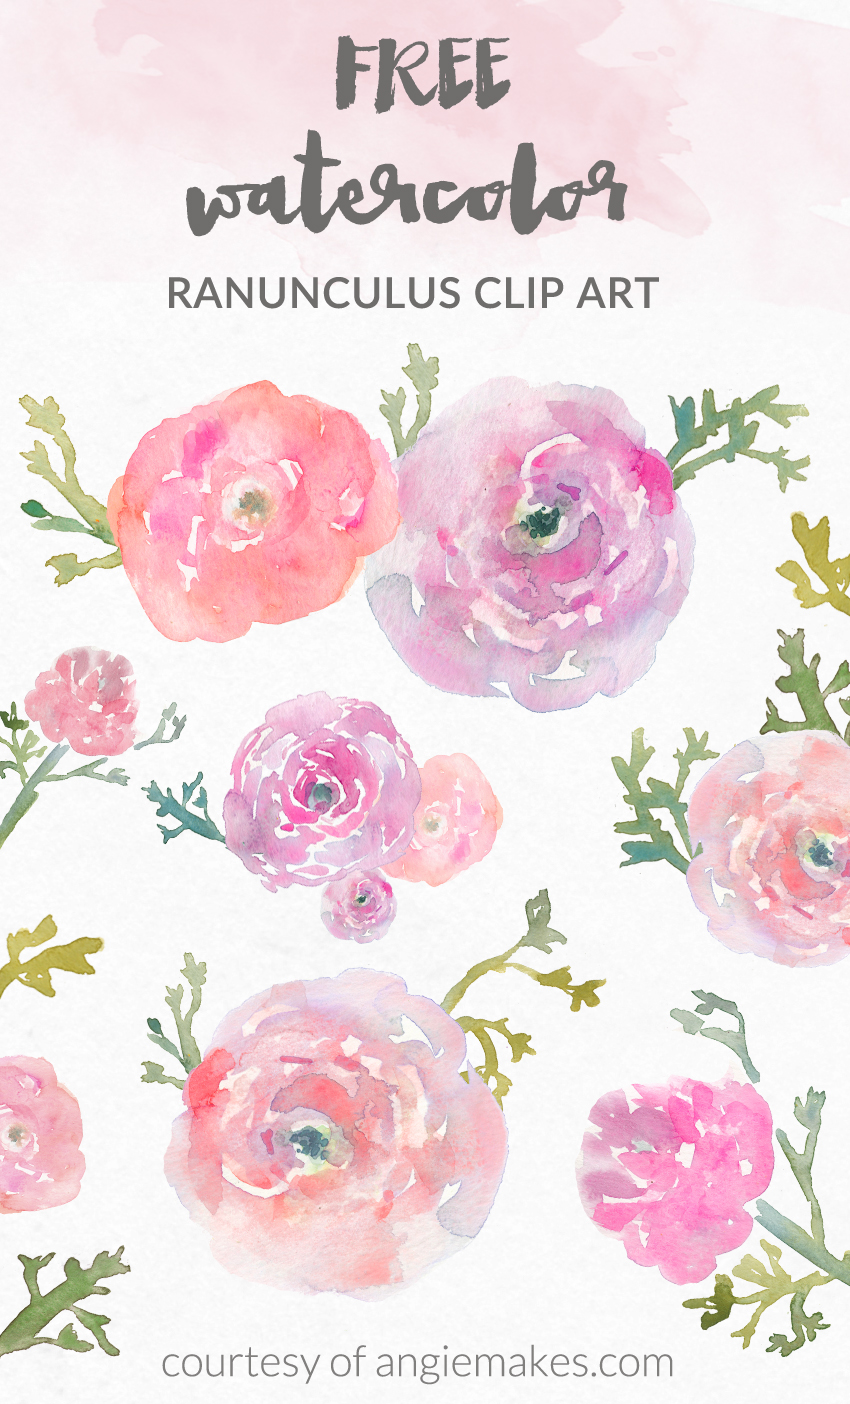 Free Watercolor Flower Clip Art - Watercolor Ranunculus by Angie Makes | angiemakes clipartall.com